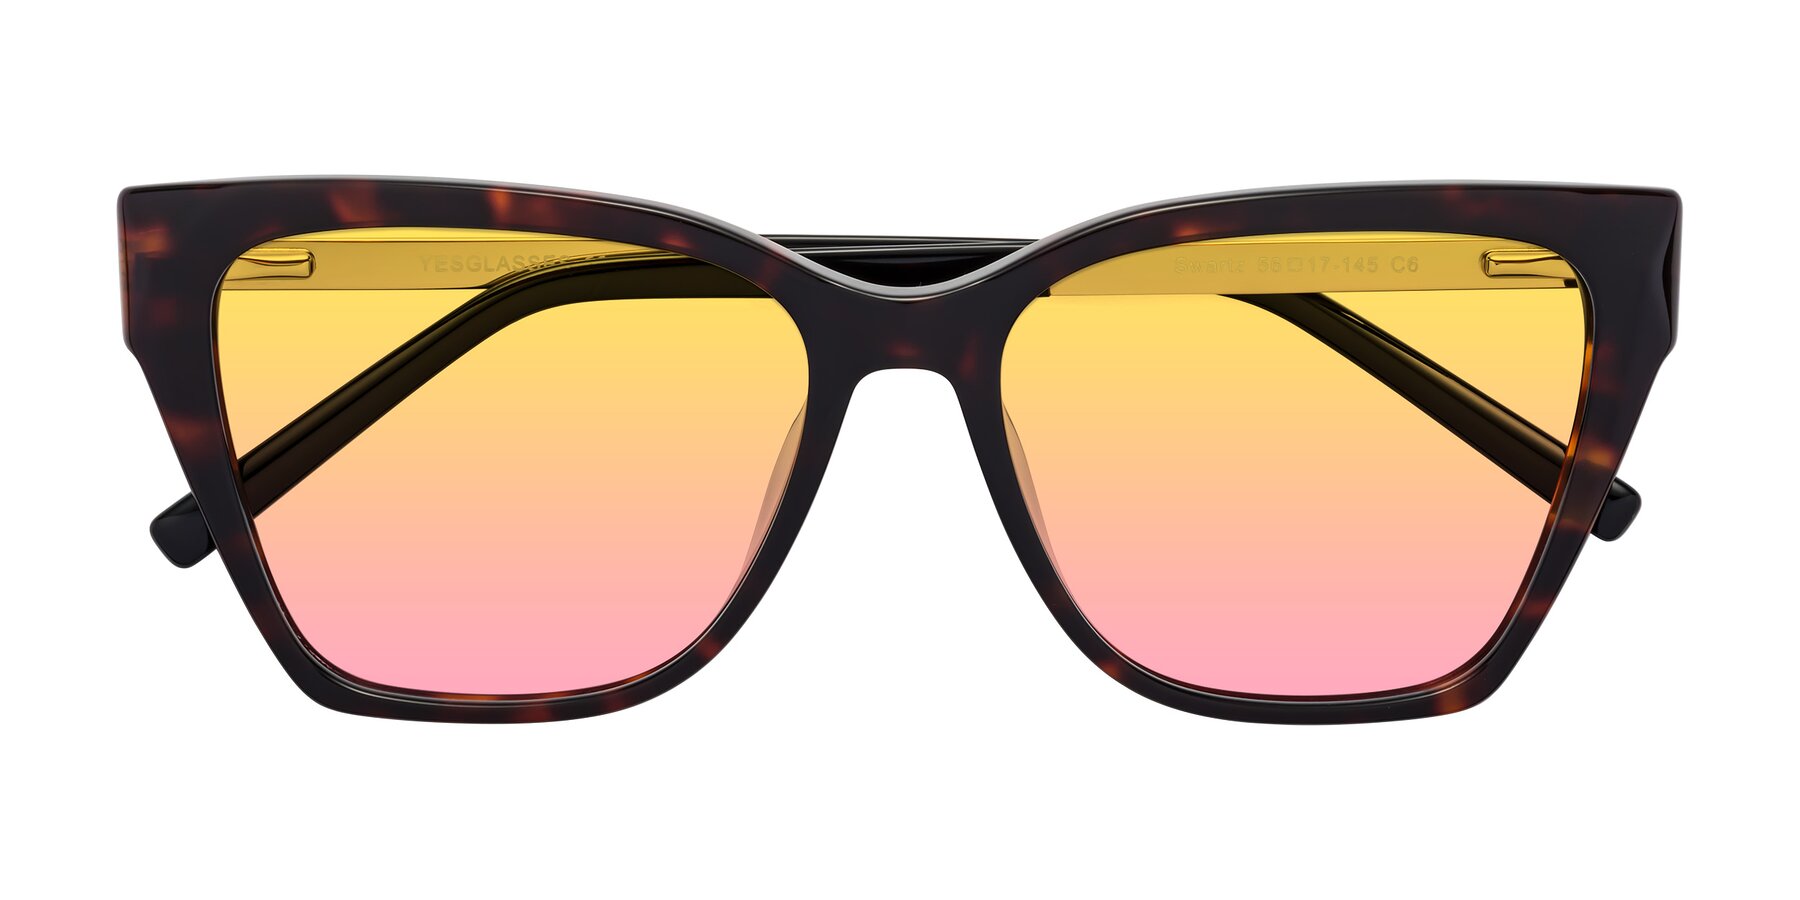 Folded Front of Swartz in Tortoise with Yellow / Pink Gradient Lenses